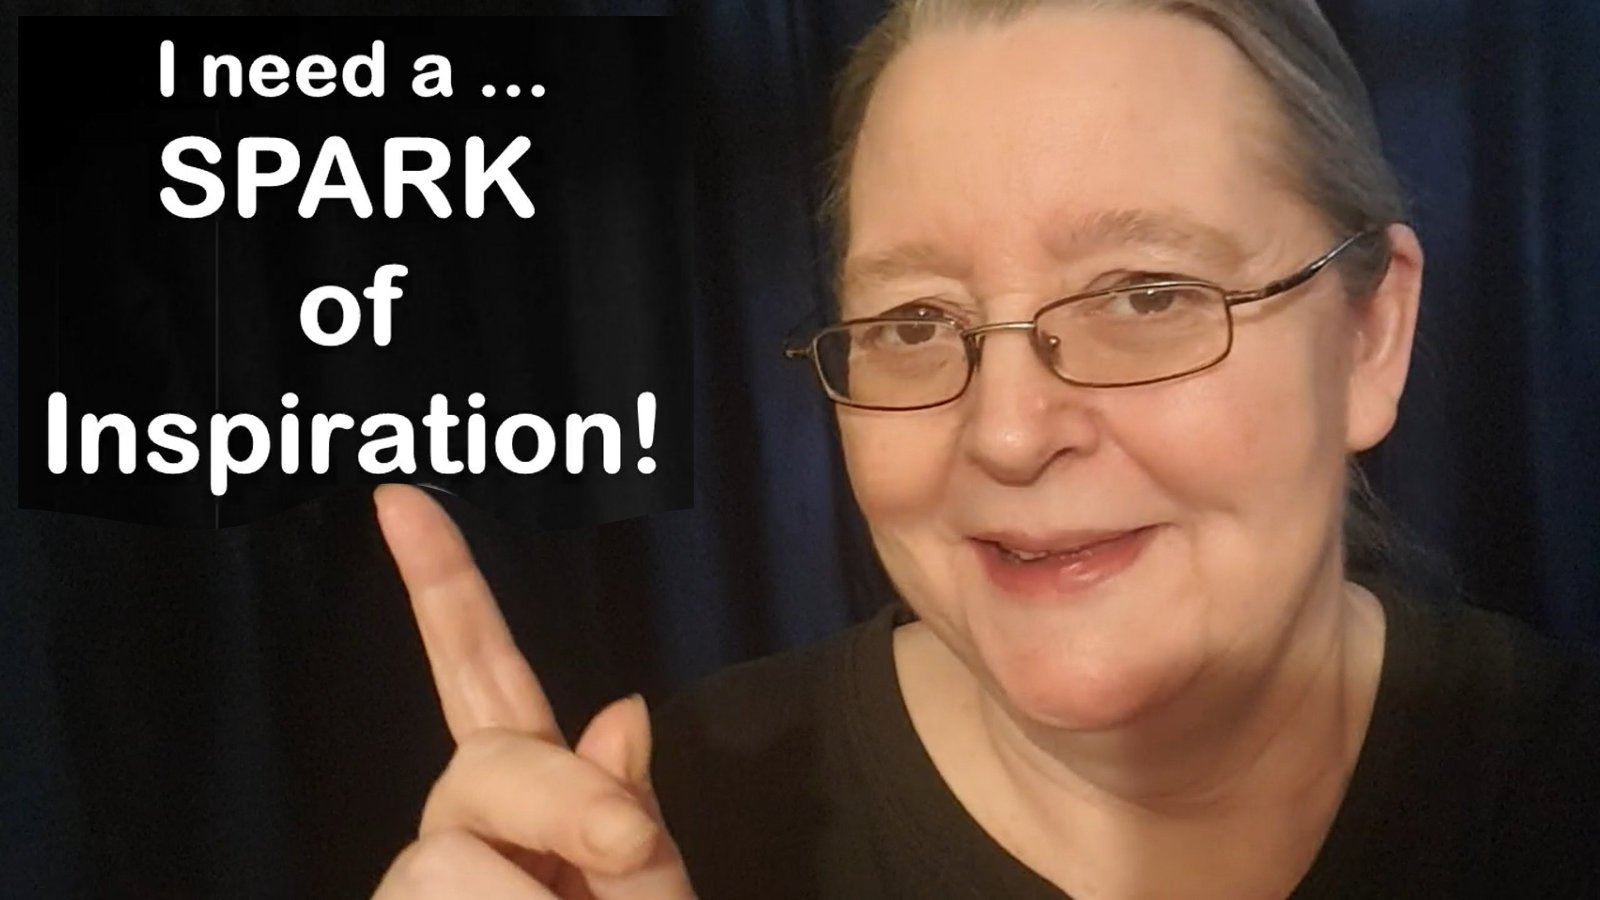 I need a spark of inspiration!